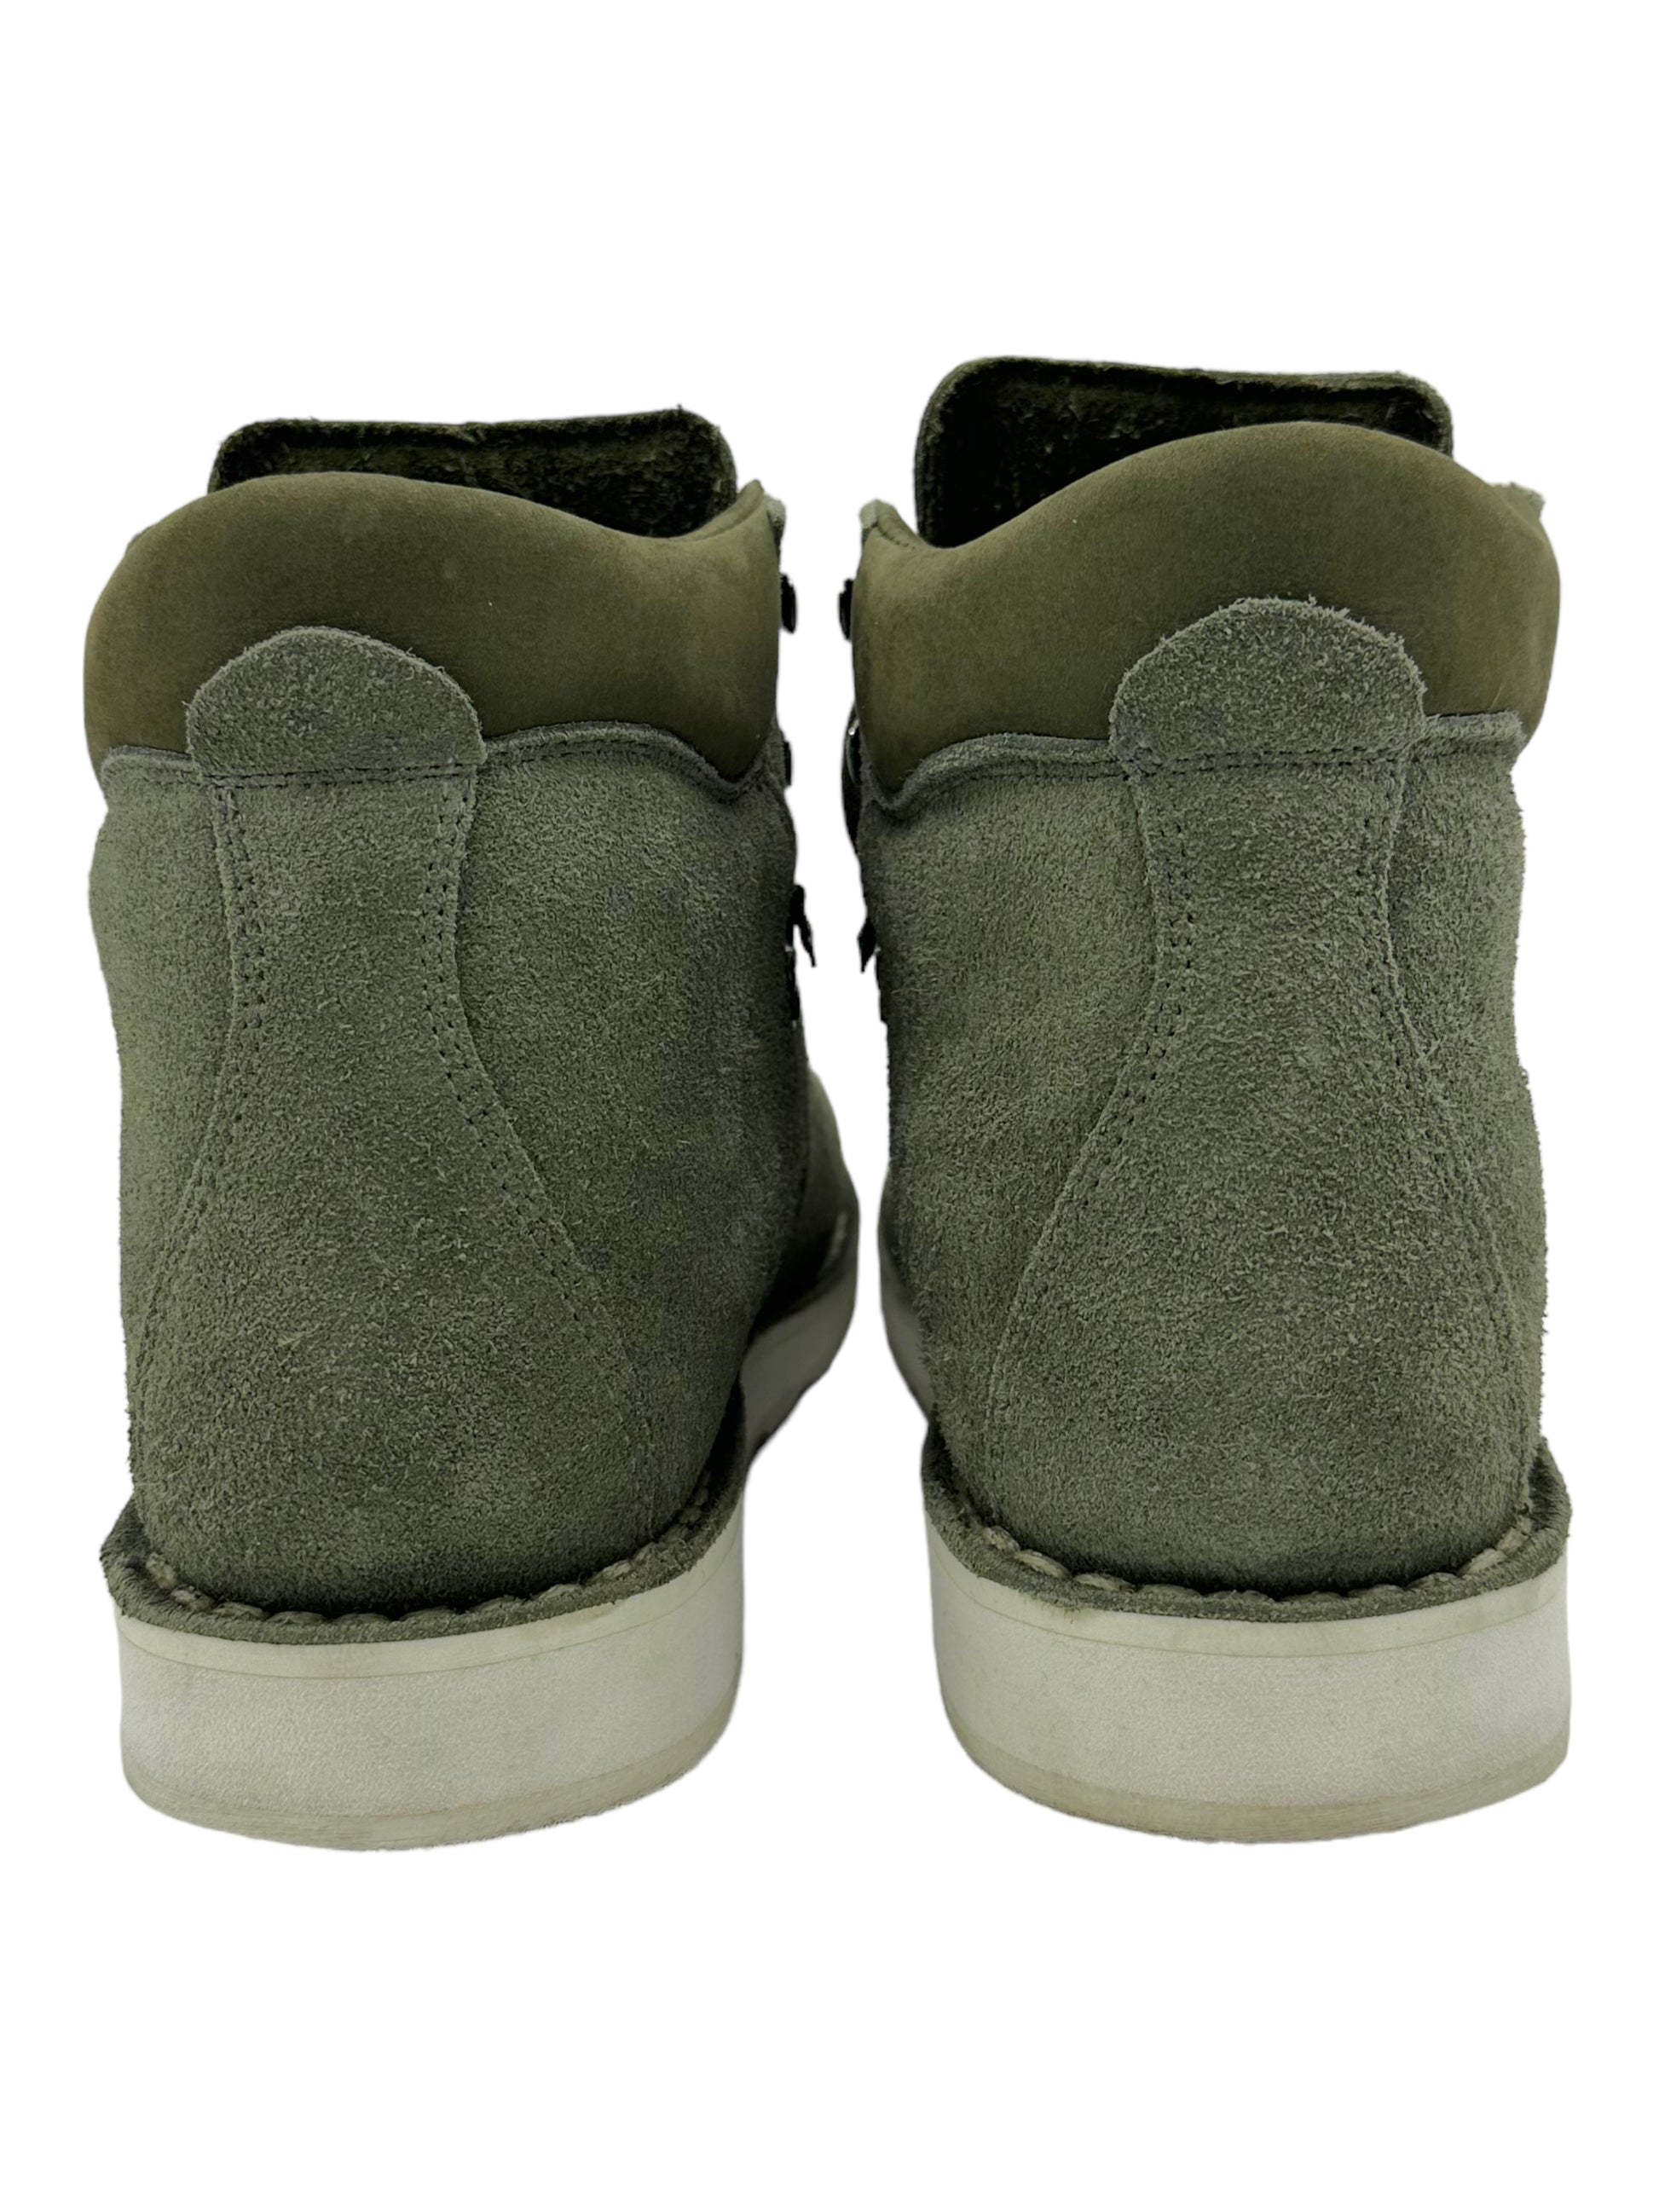 Diemme Olive Green Sherpa Lined Roccia Vet Hiking Boots - Genuine Design Luxury Consignment for Men. New & Pre-Owned Clothing, Shoes, & Accessories. Calgary, Canada